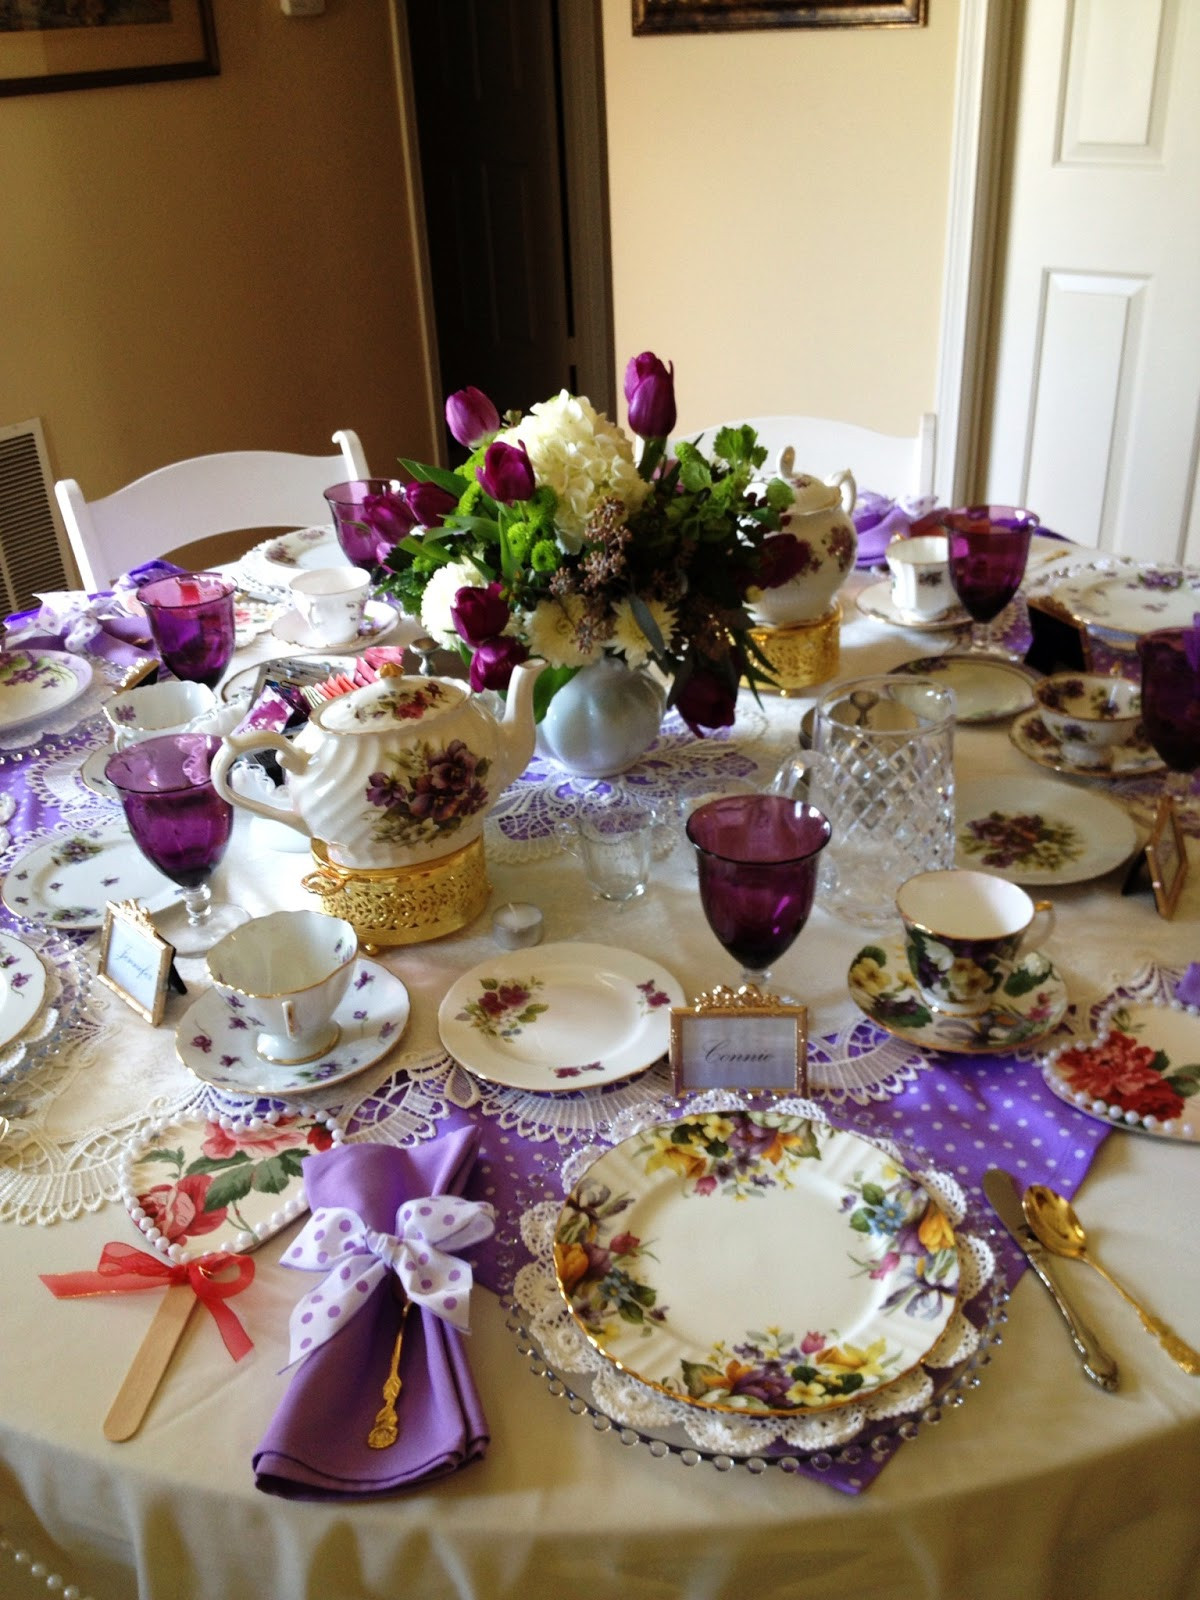 Table Setting Ideas For Tea Party
 Make it Delightful Tea Table in Purples Polka Dots